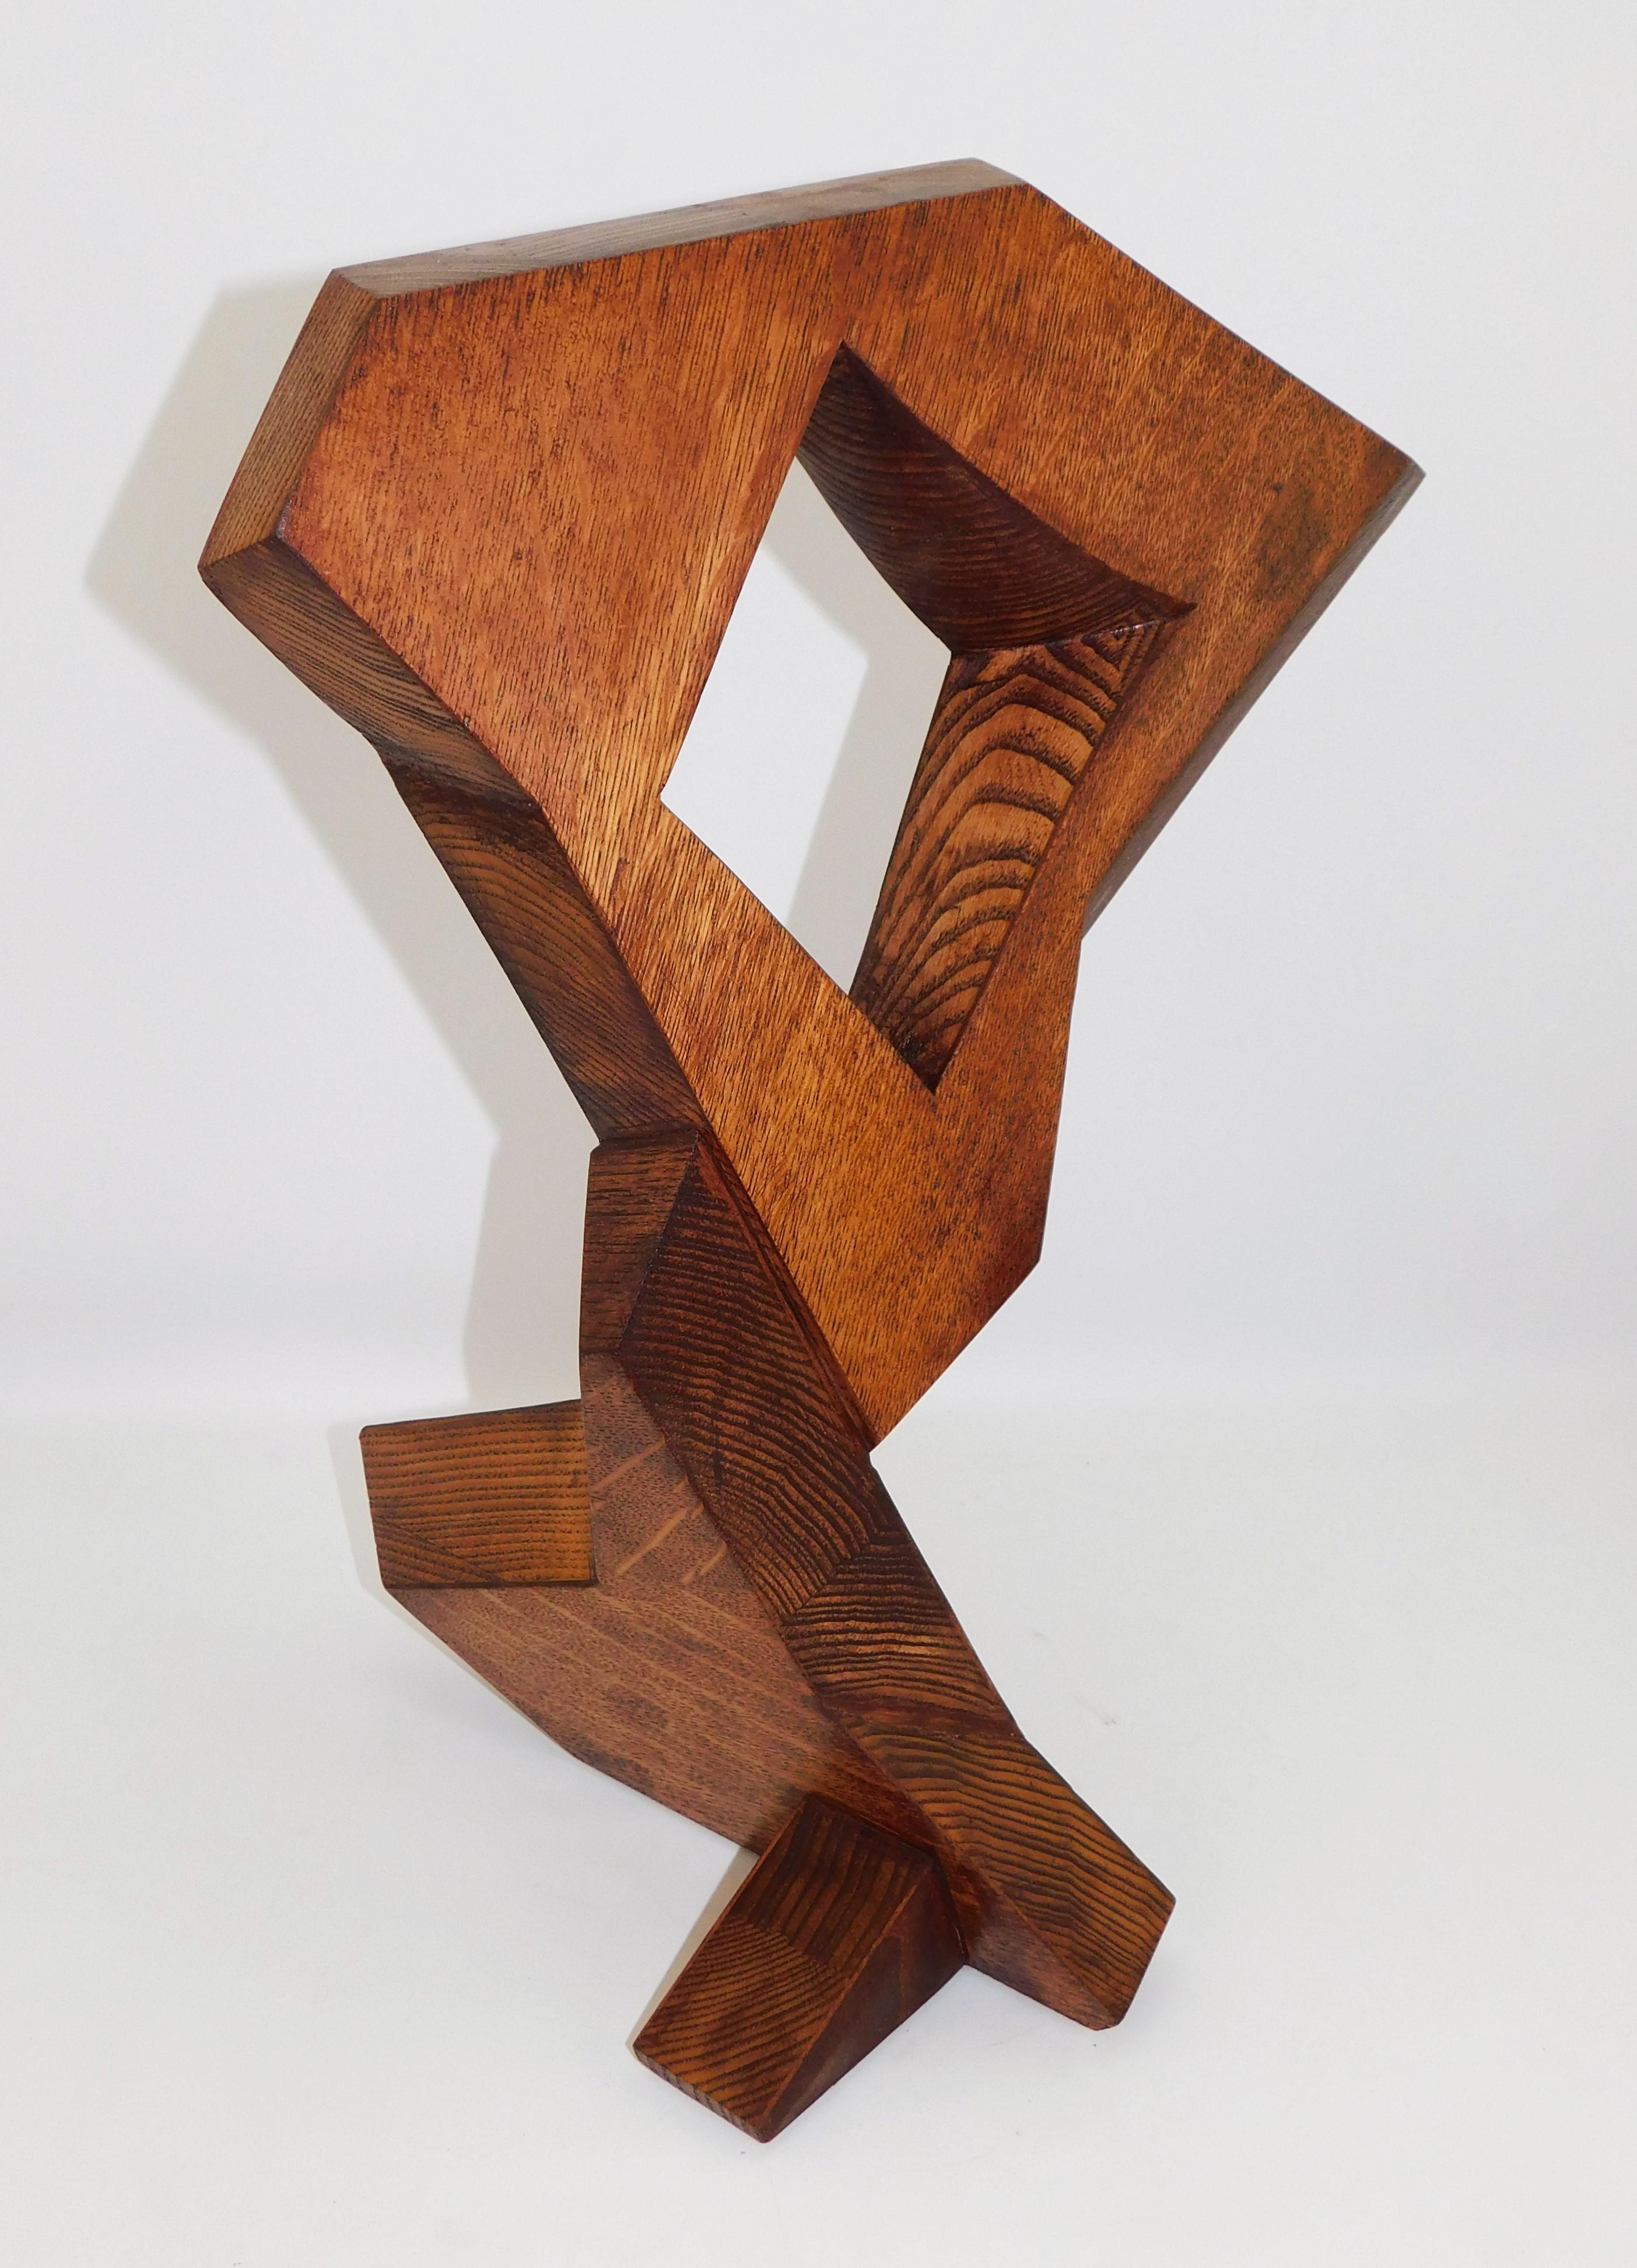 abstract wood sculpture ideas